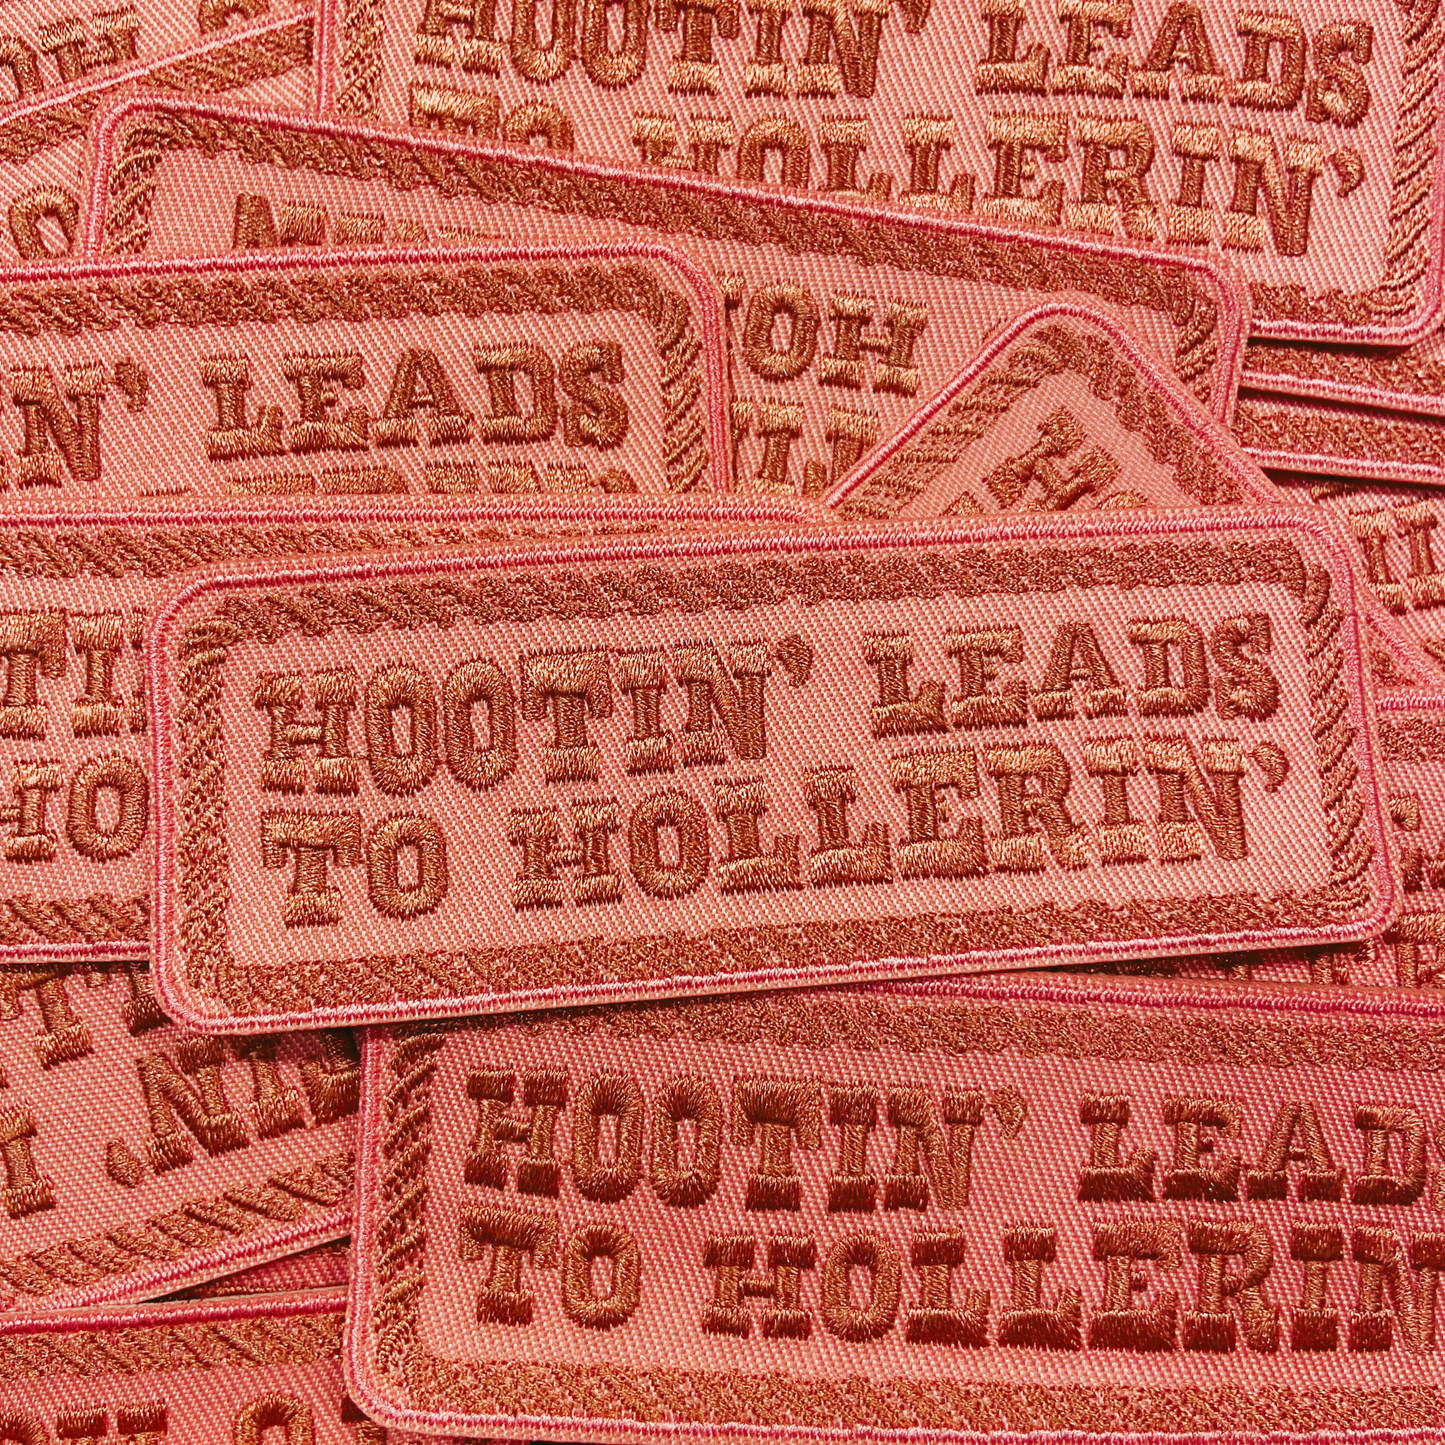 4" x 1.5" Hootin' Leads To Hollerin' -   Embroidered Hat Patch